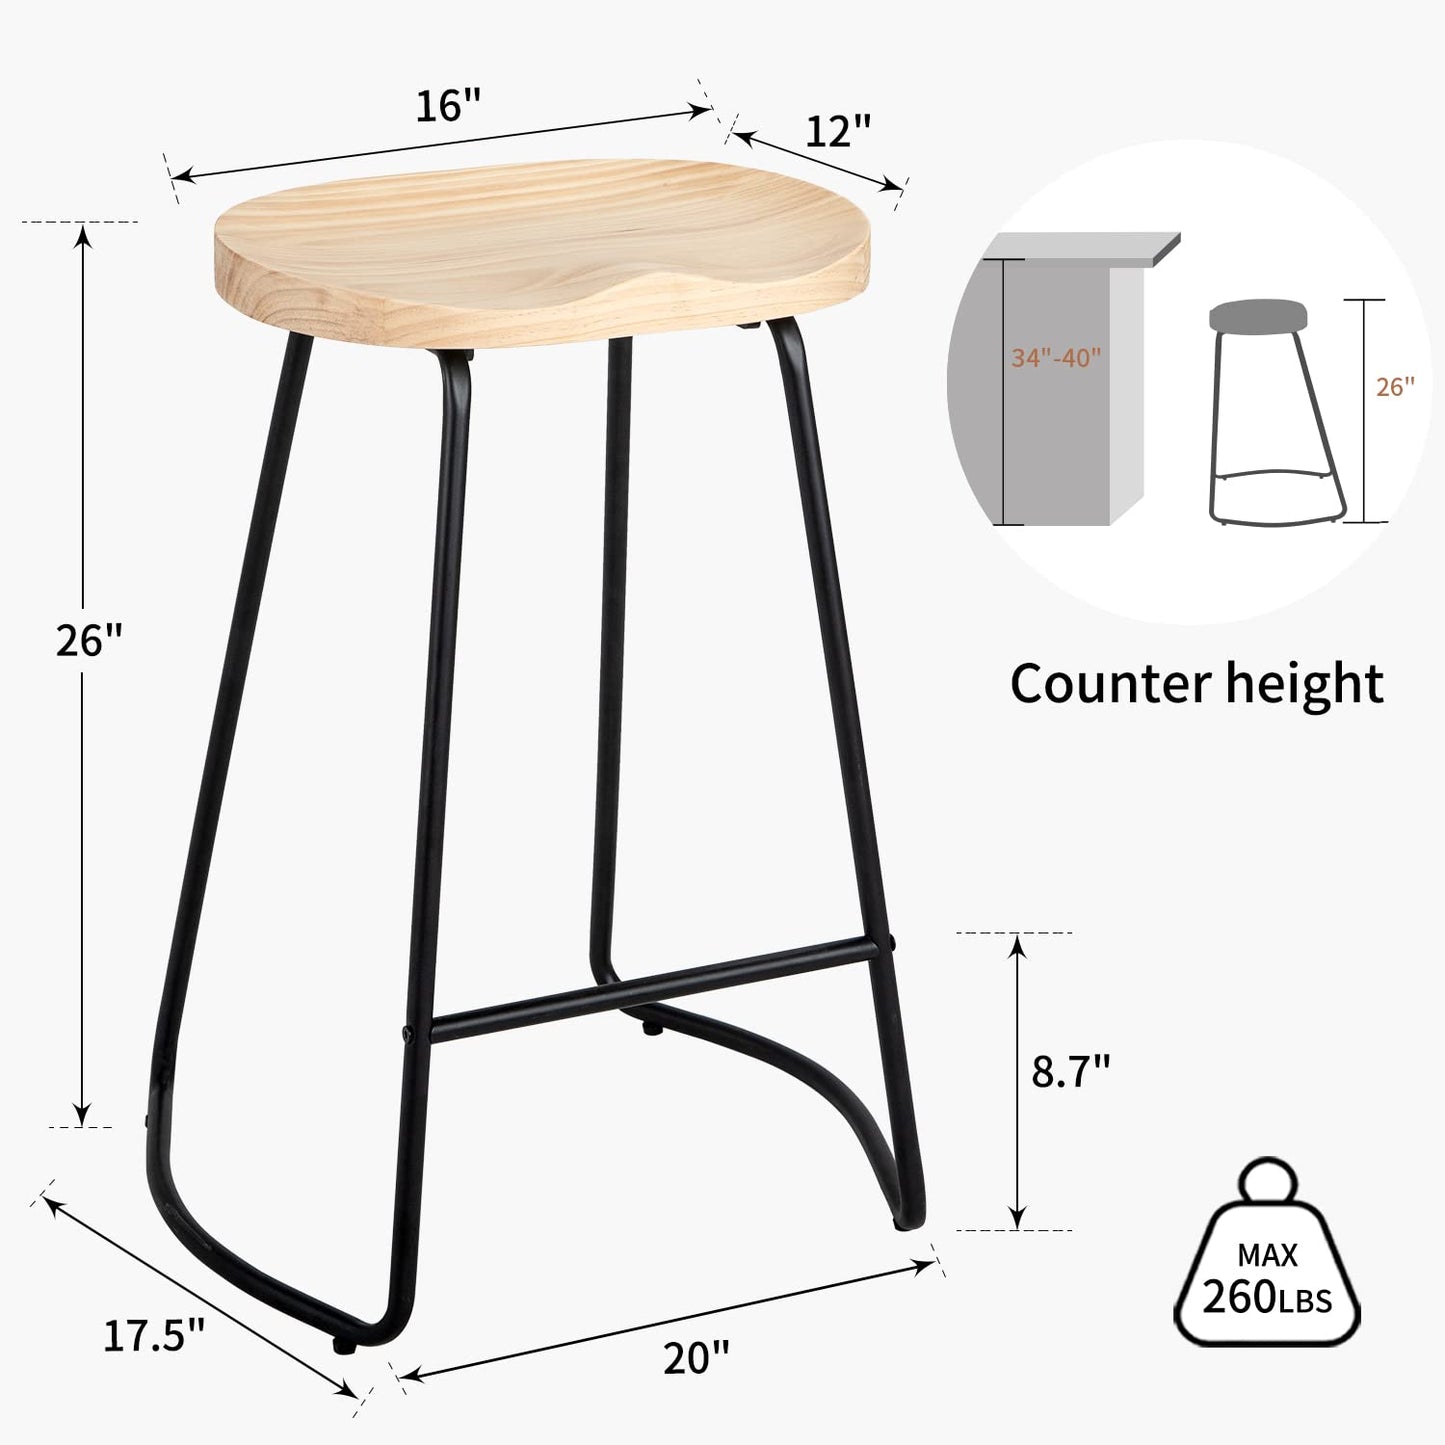 HeuGah Counter Height Bar Stools Set of 3, Solid Wood Bar Stool for Kitchen Island 26" Barstool with Metal Leg Rustic Backless Saddle Seat Stools